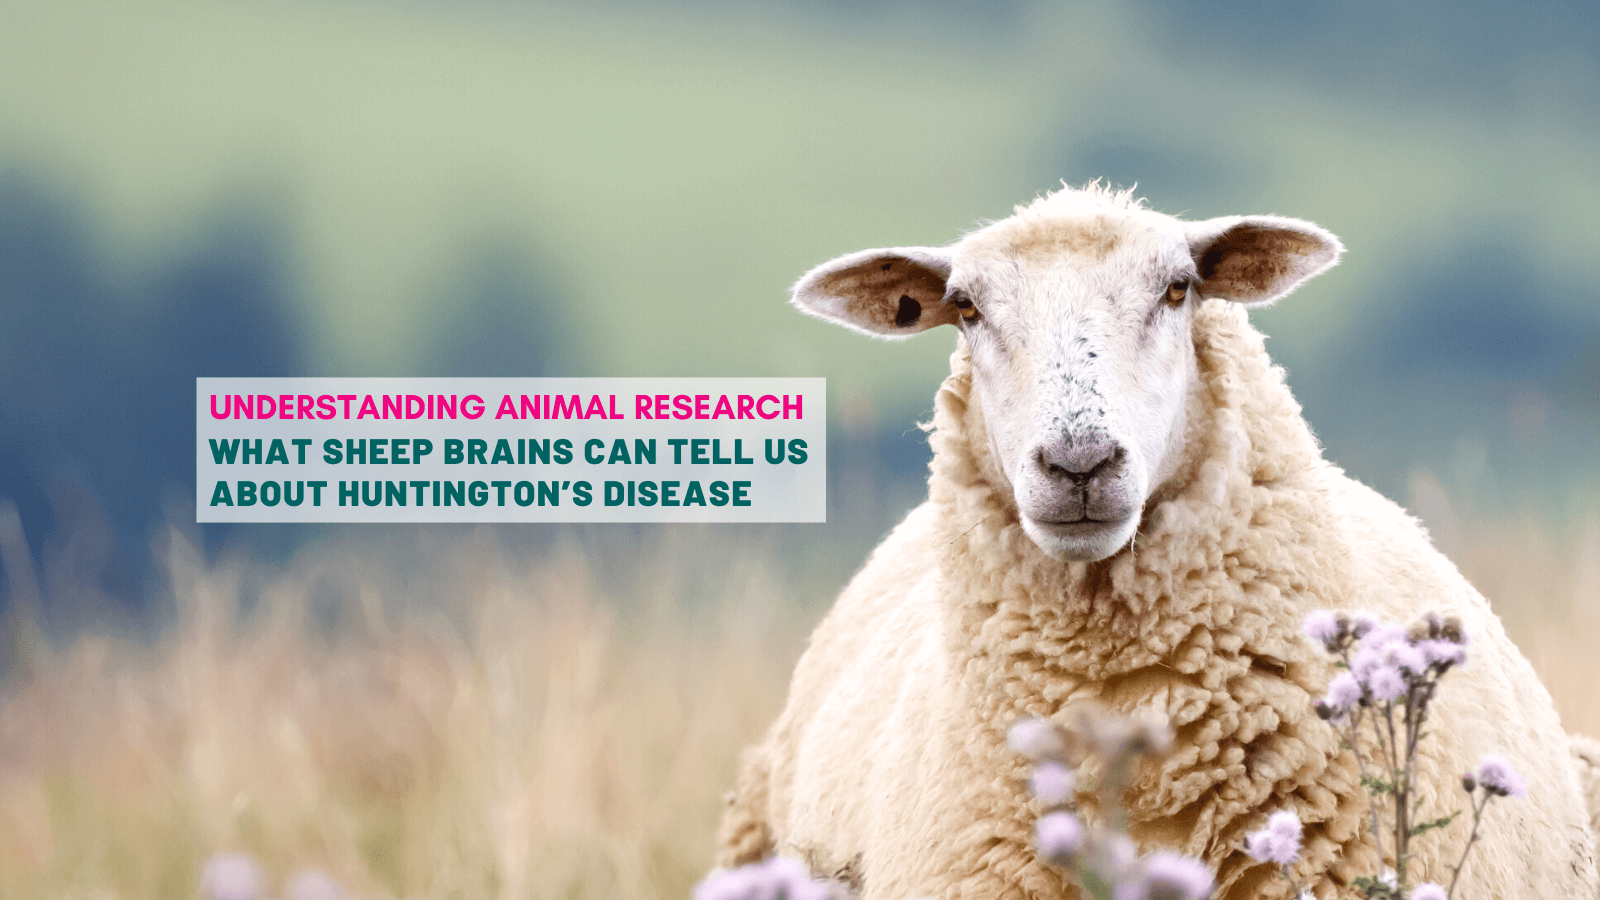 What sheep brains can tell us about Huntington's disease